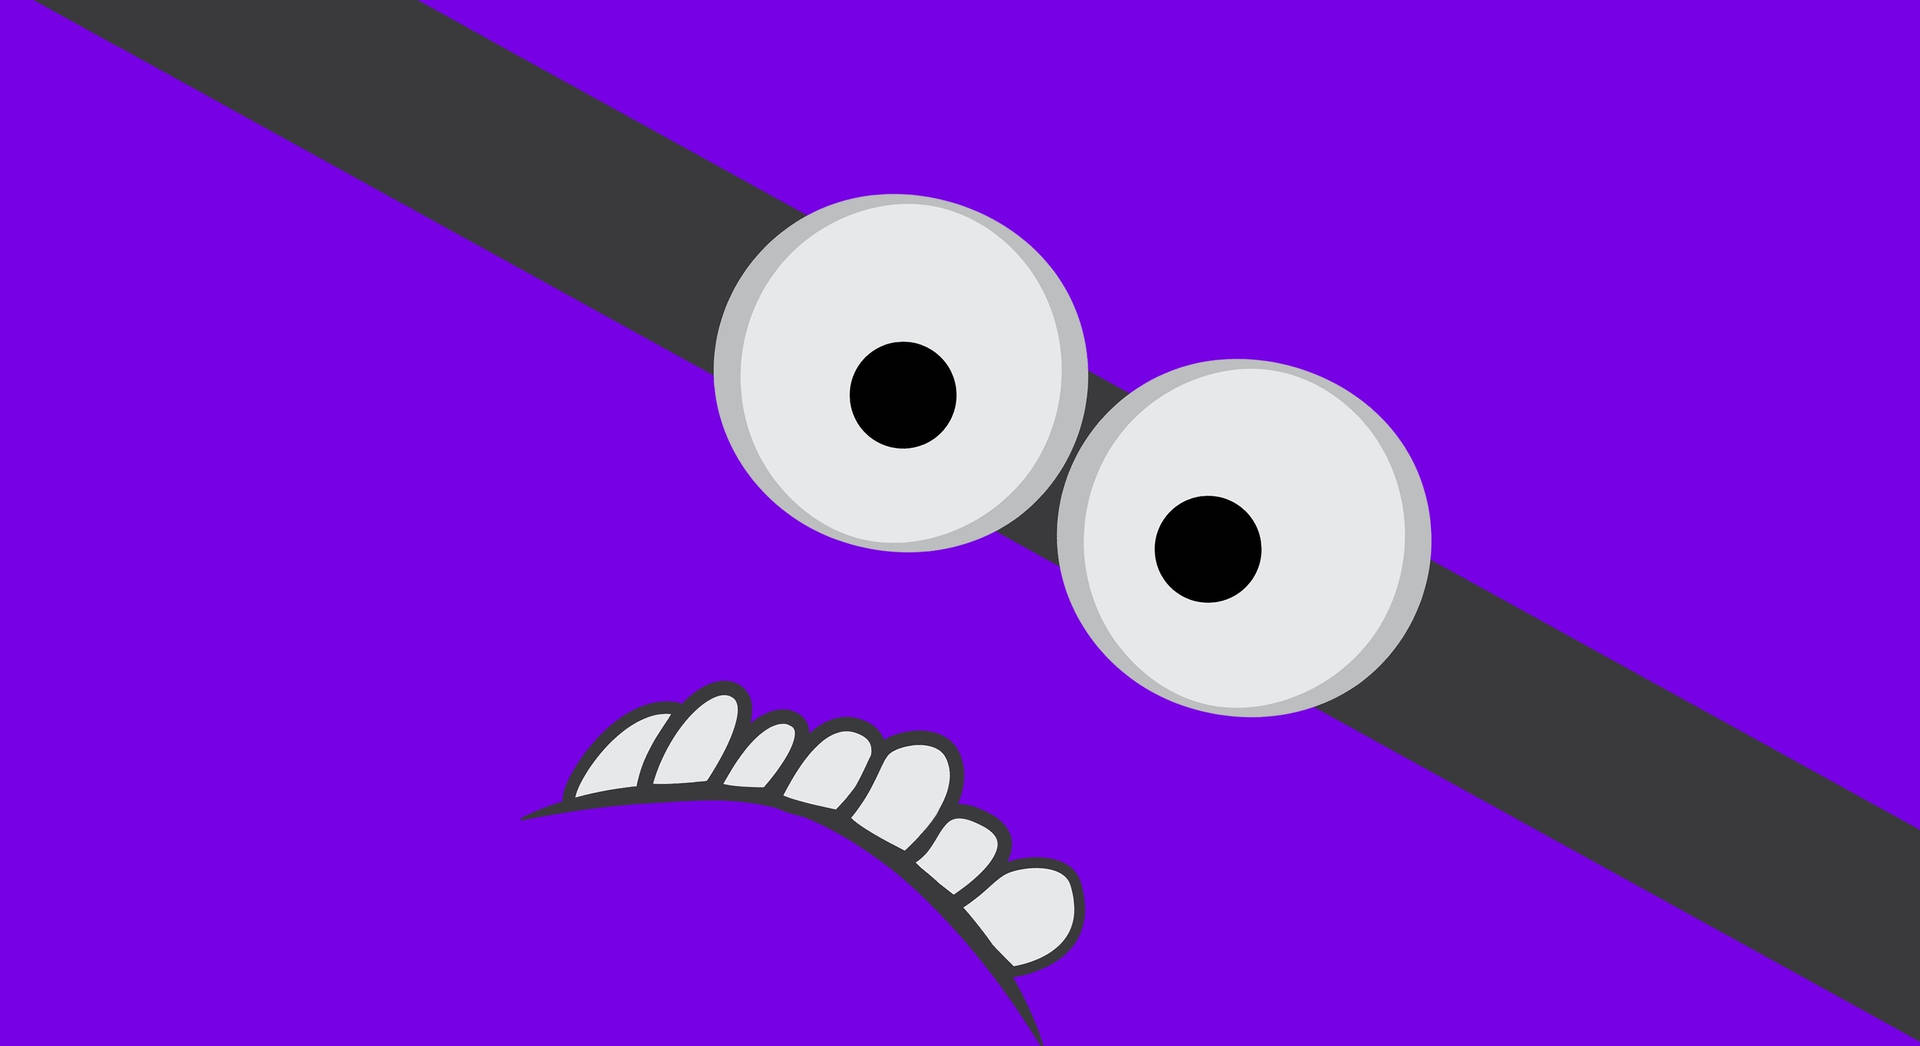 Evil Minion Staring Face Background